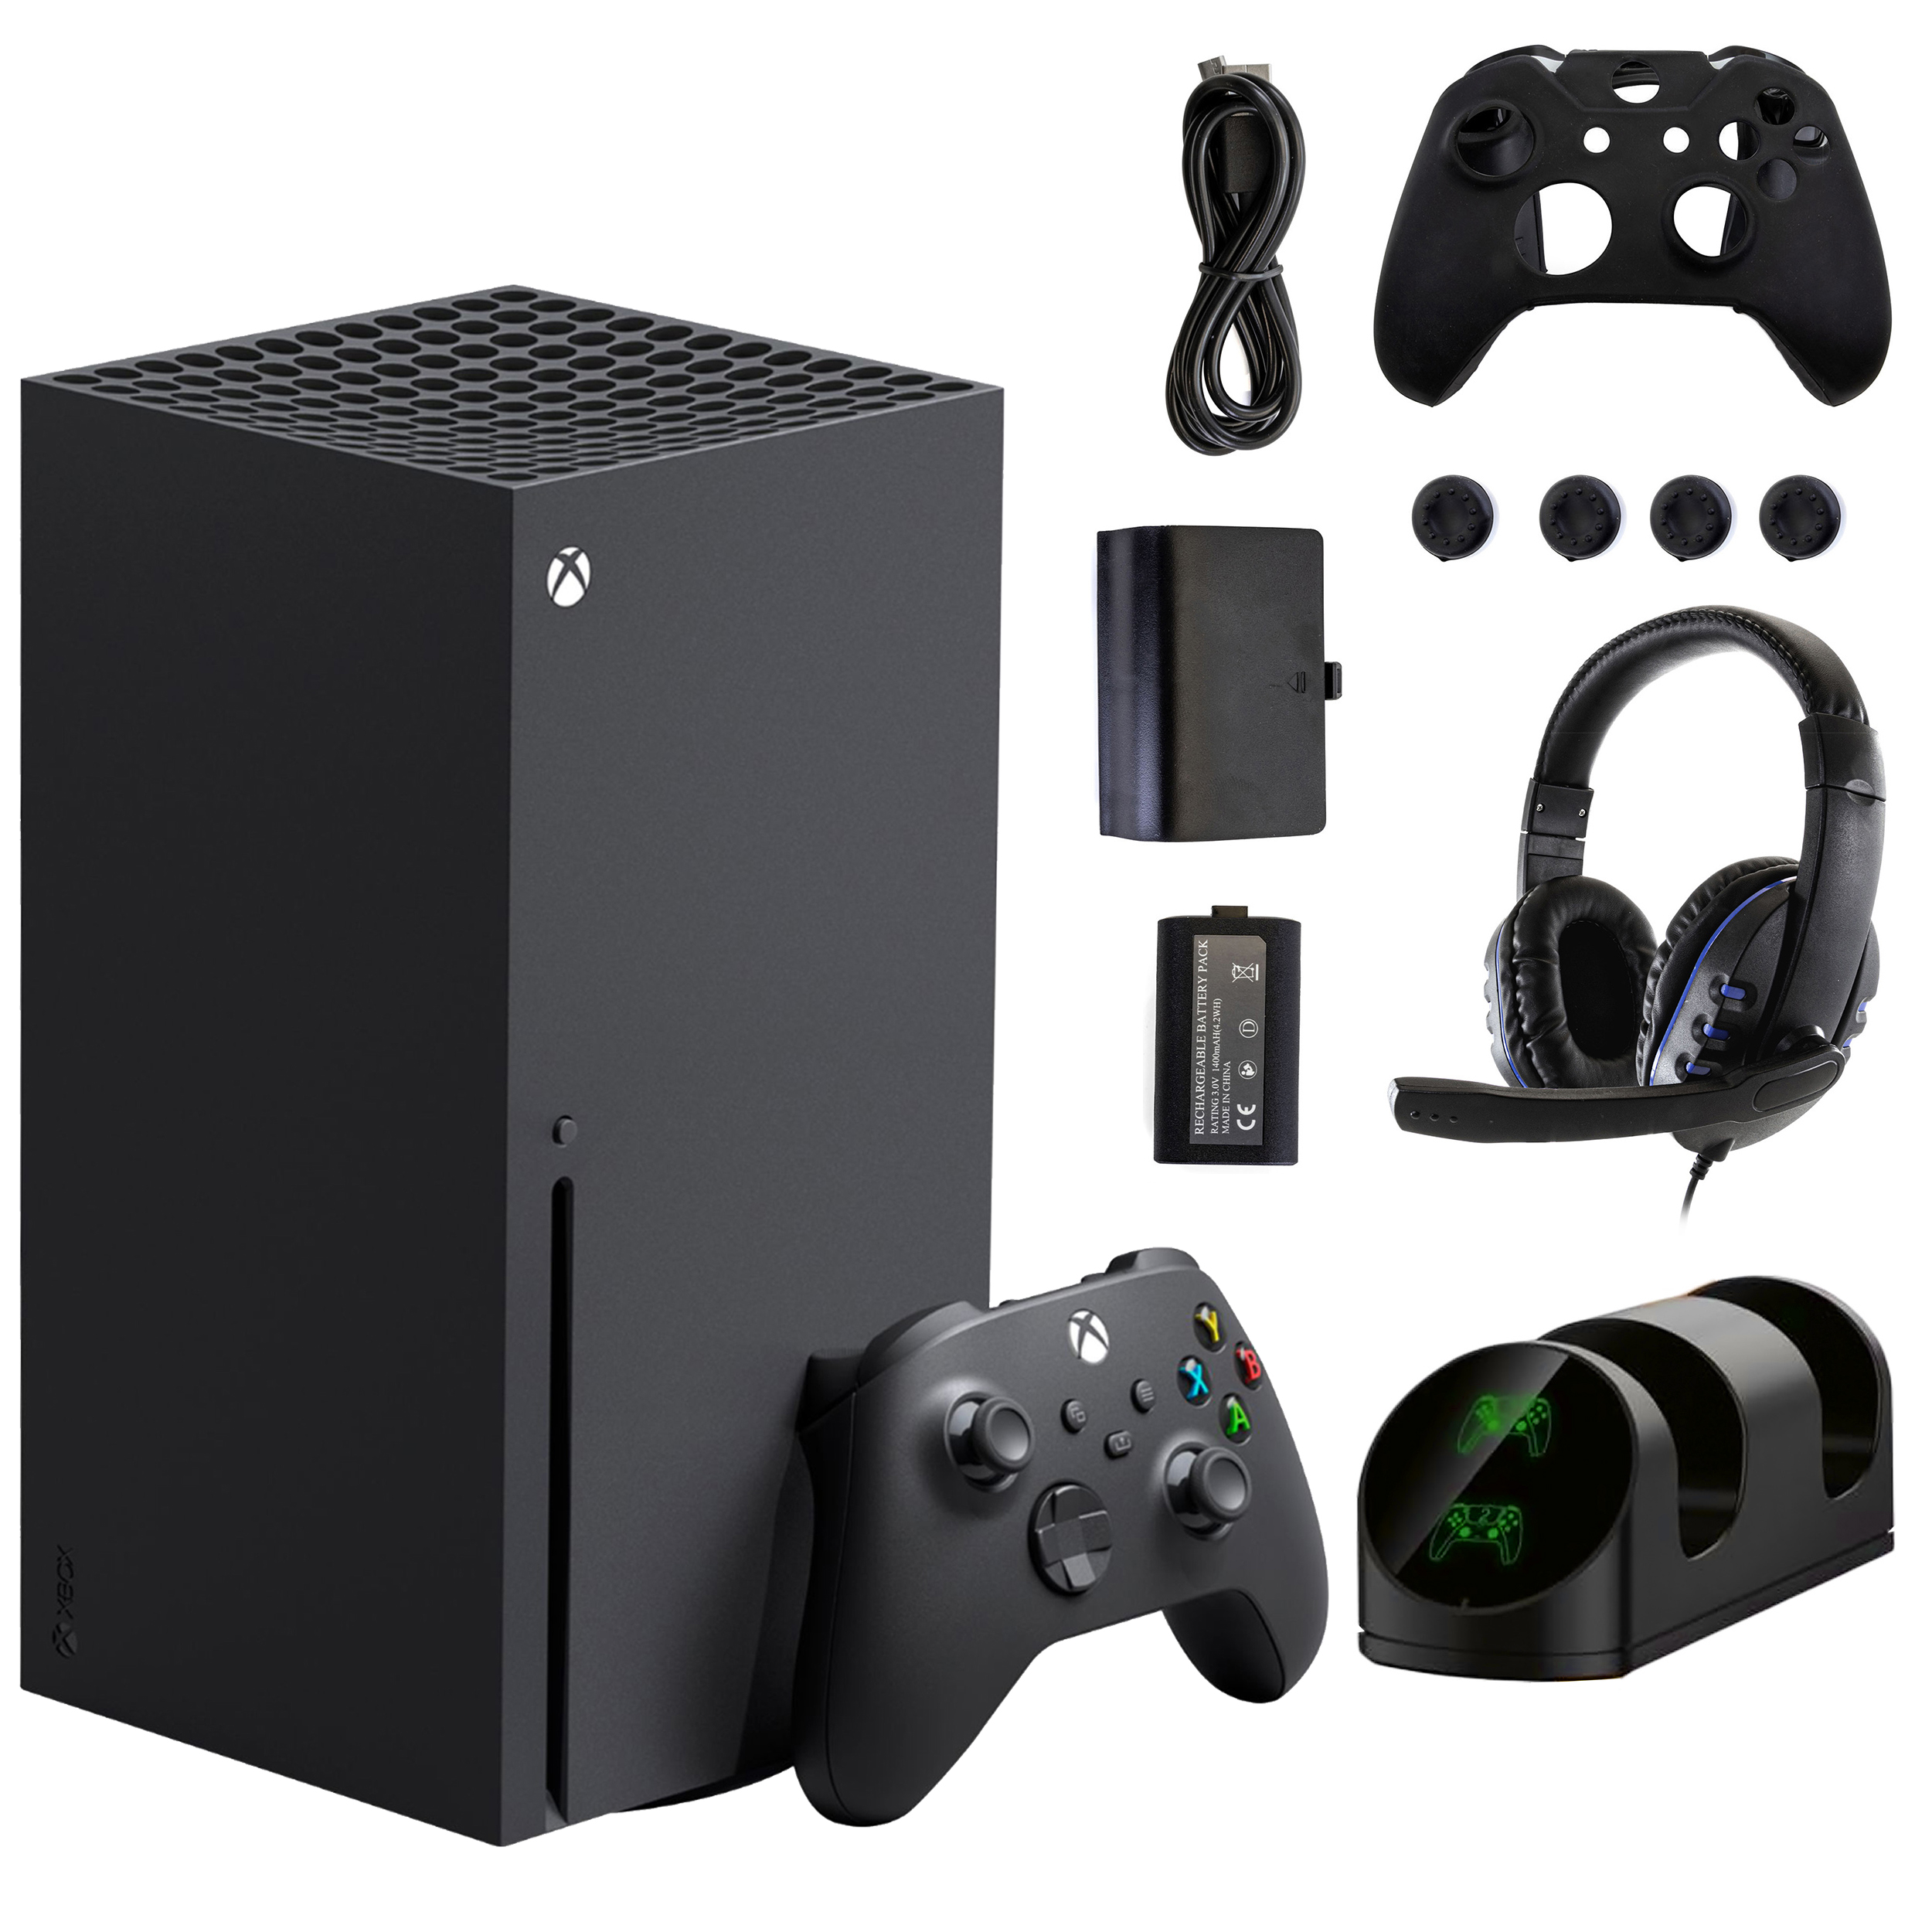 Microsoft Xbox Series X Console with Accessories Kit- Refurbished